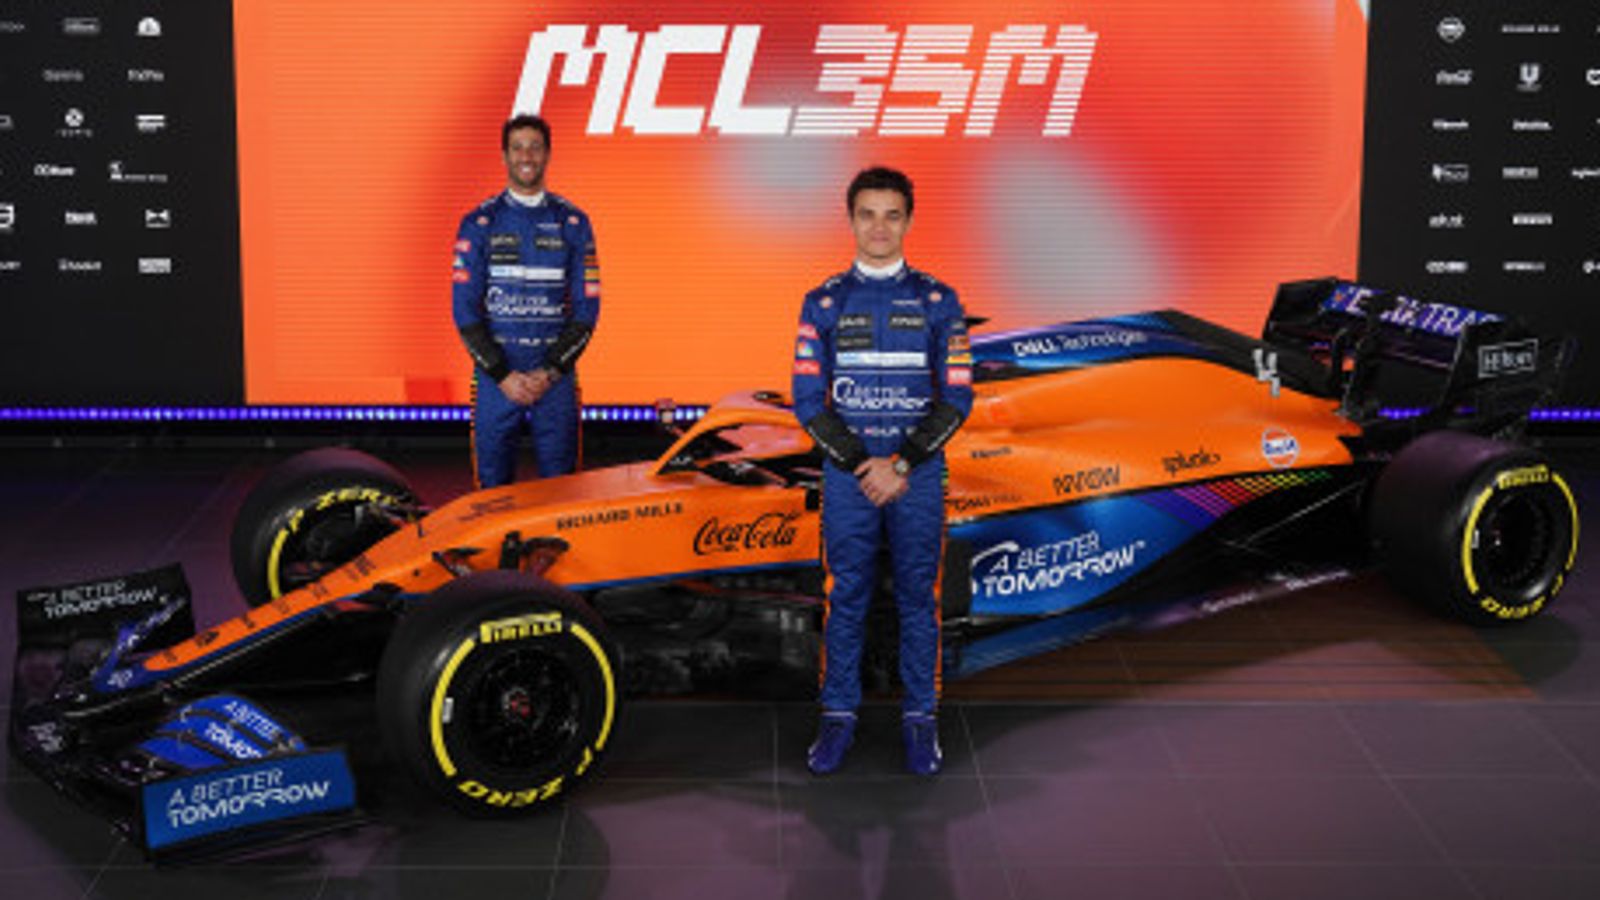 McLaren hit the track for the first time with a new MCL35M F1 powered Mercedes at Silverstone